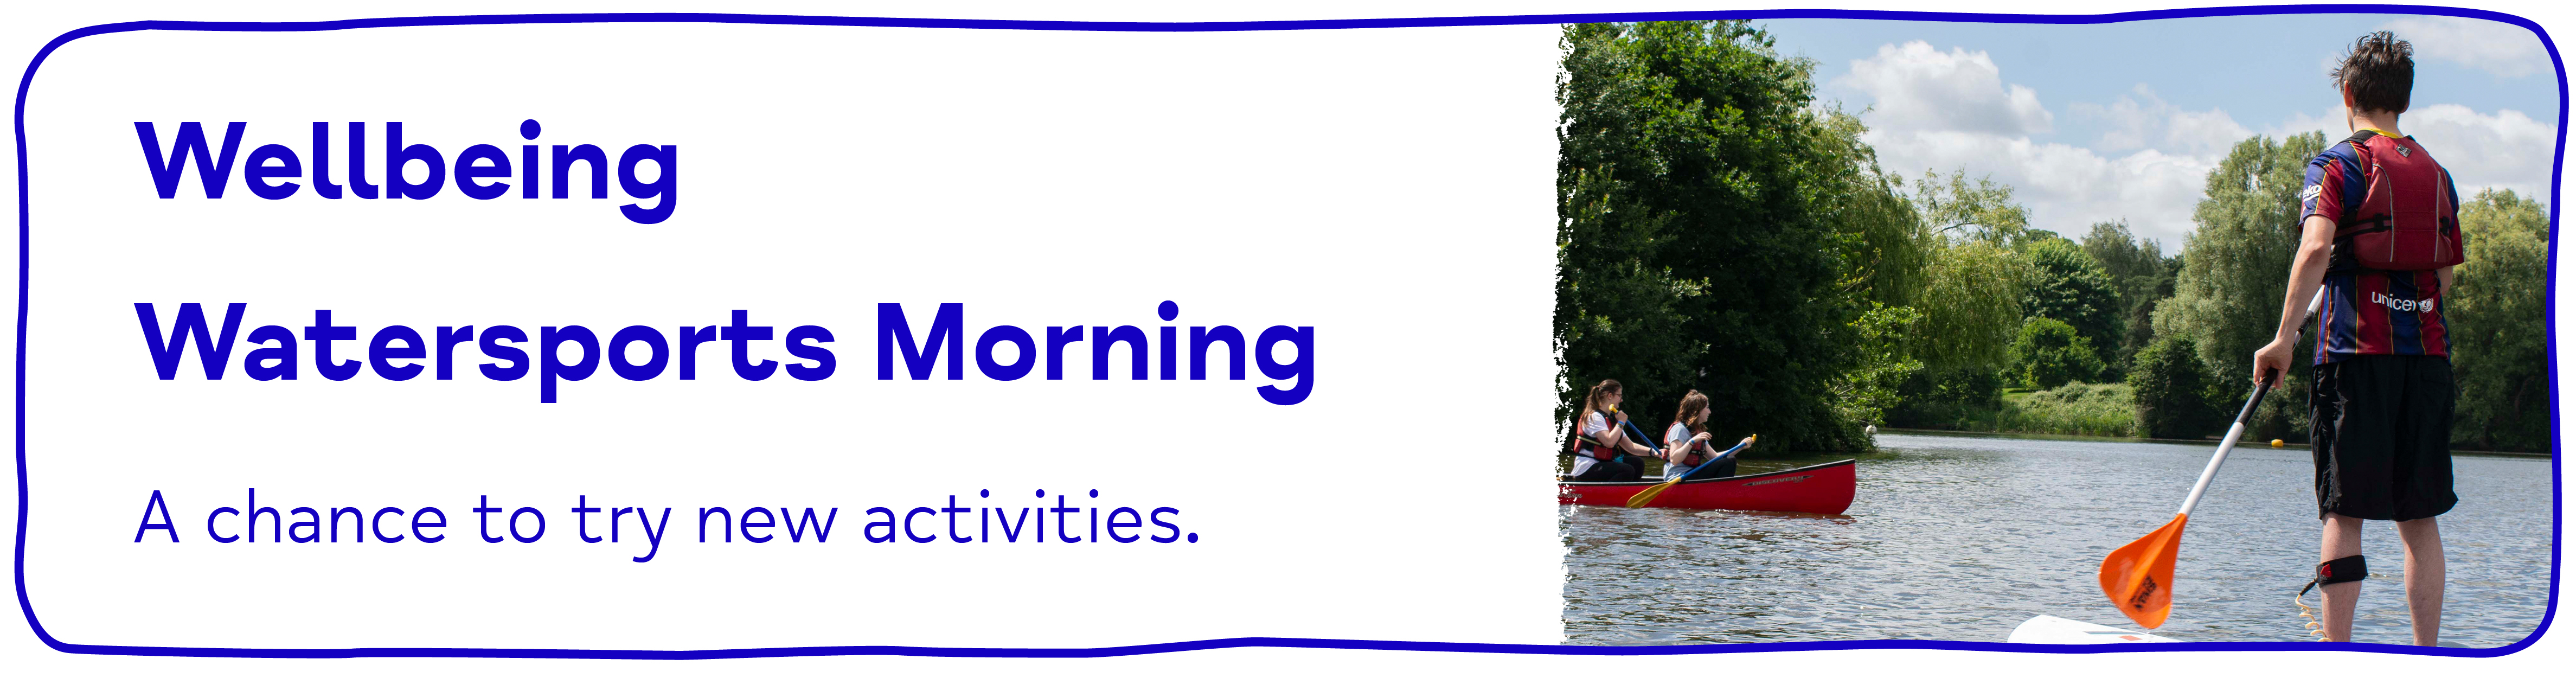 Wellbeing Watersports Morning A chance to try new activities.